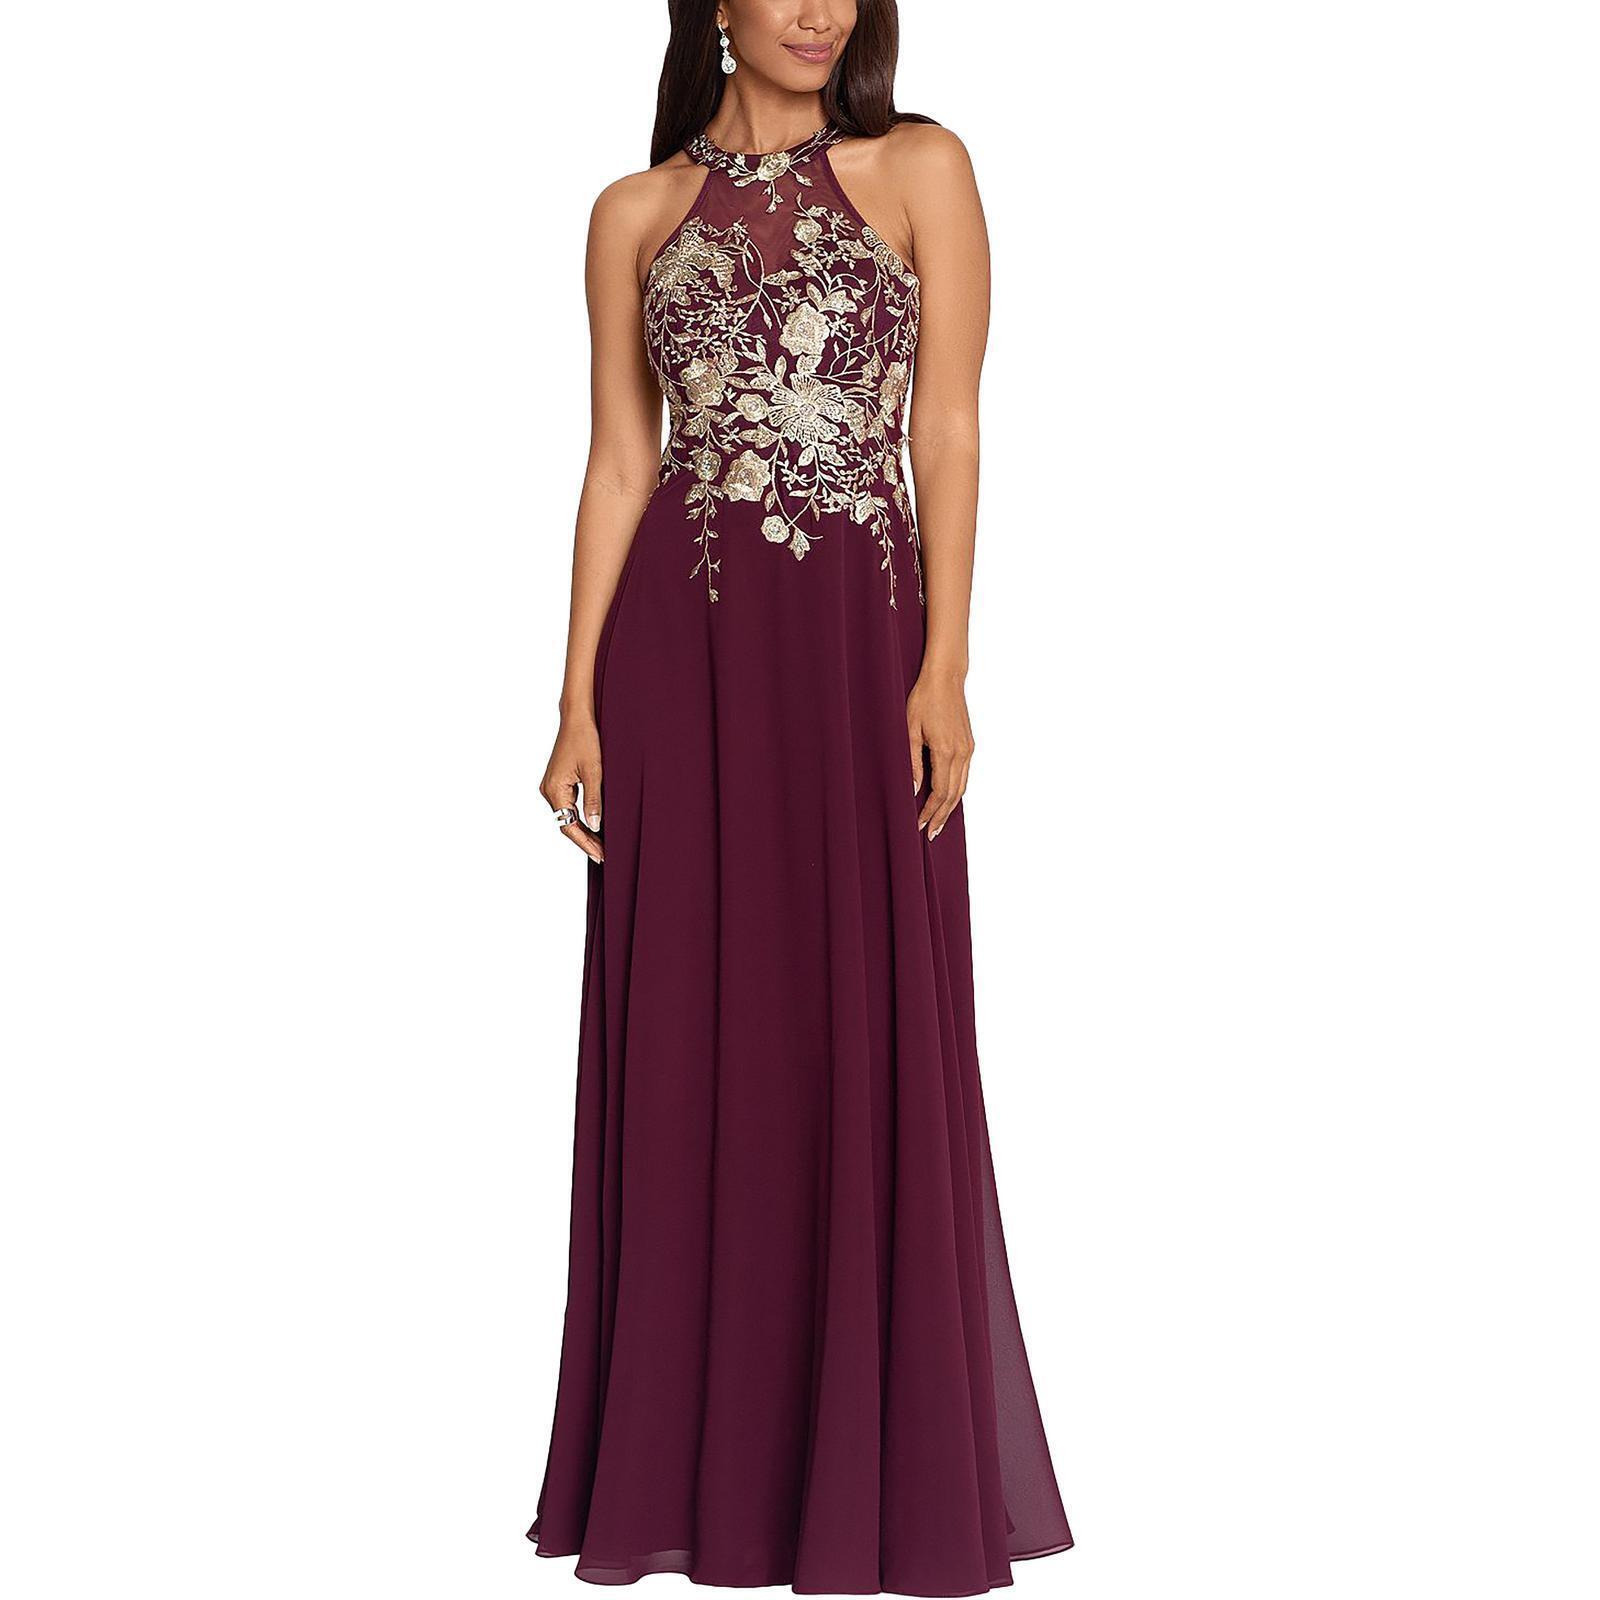 Betsy & Adam Womens Petites Embroidered Long Evening Dress